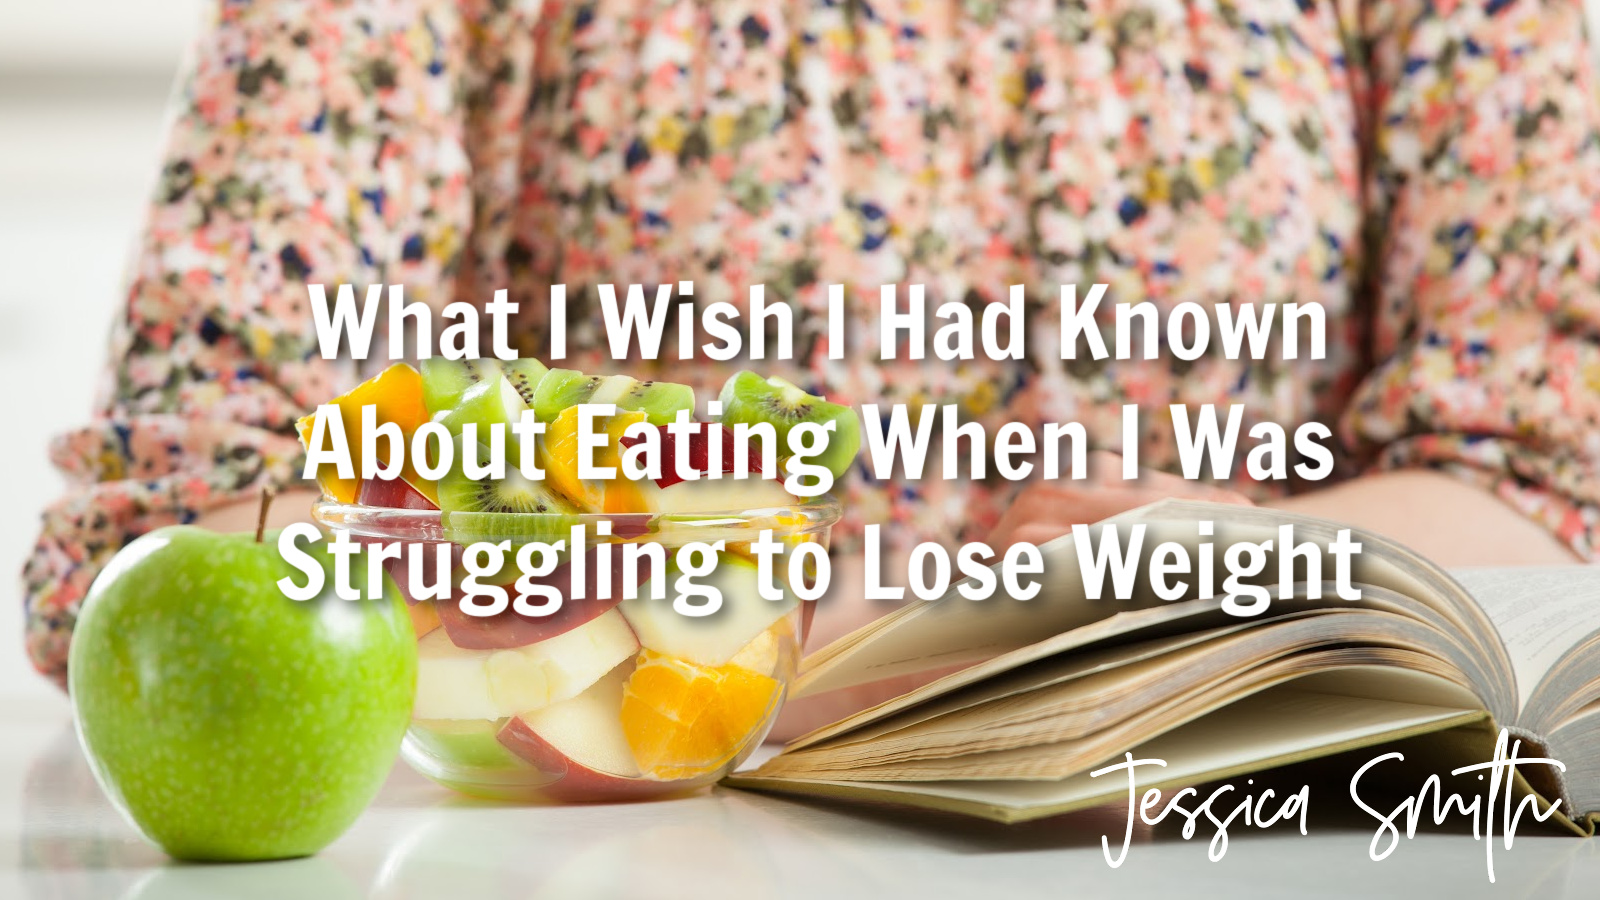 What I Wish I Had Known About Eating When I Was Struggling to Lose Weight